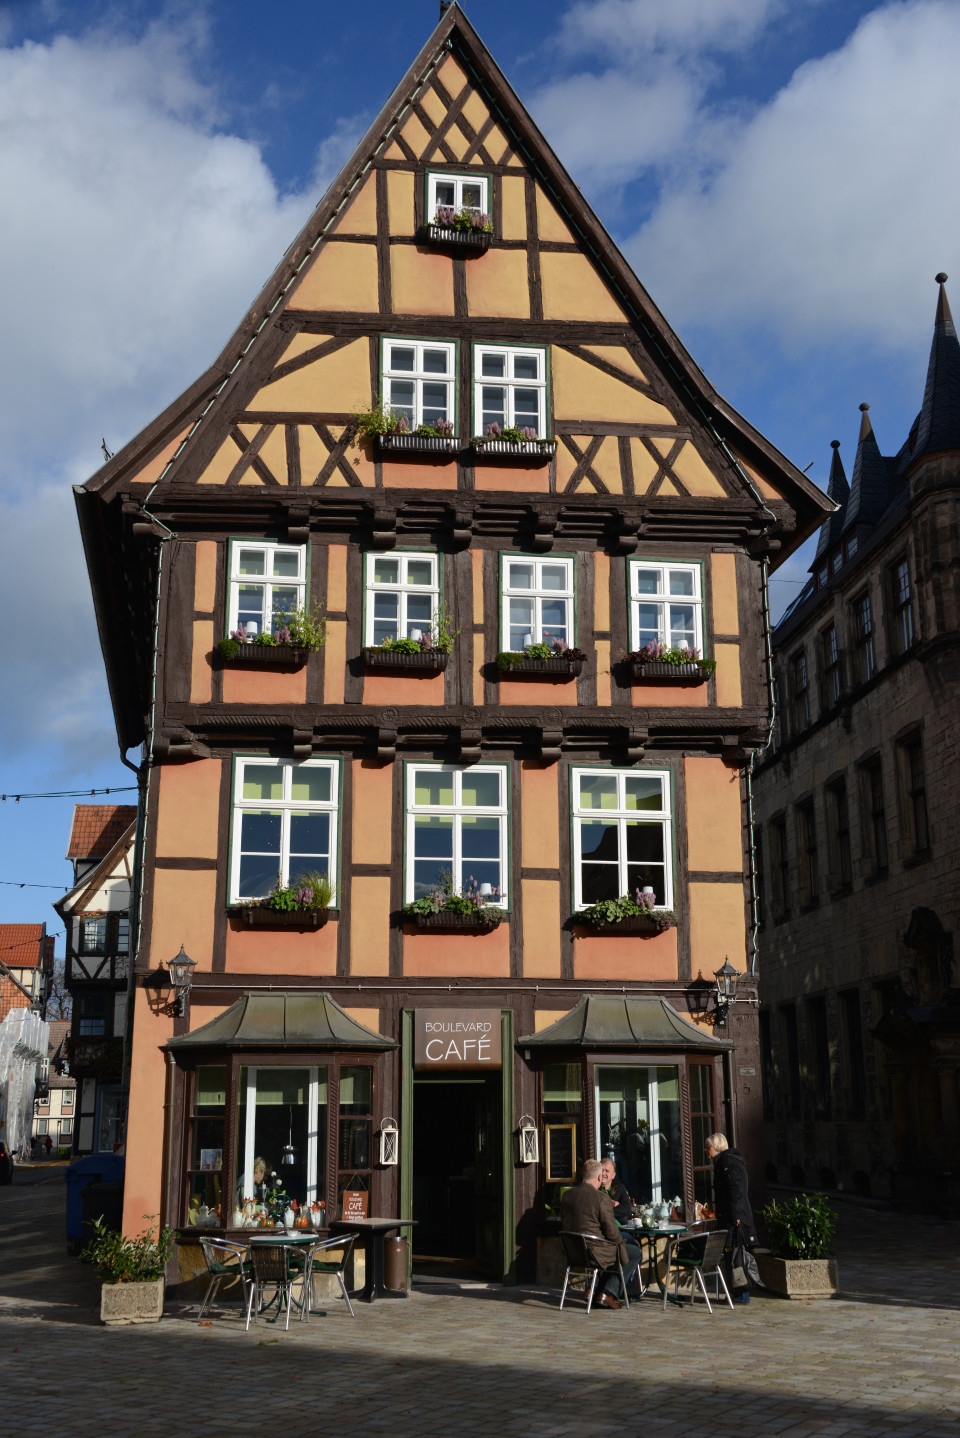 The half-timbered houses of Quedlinburg.